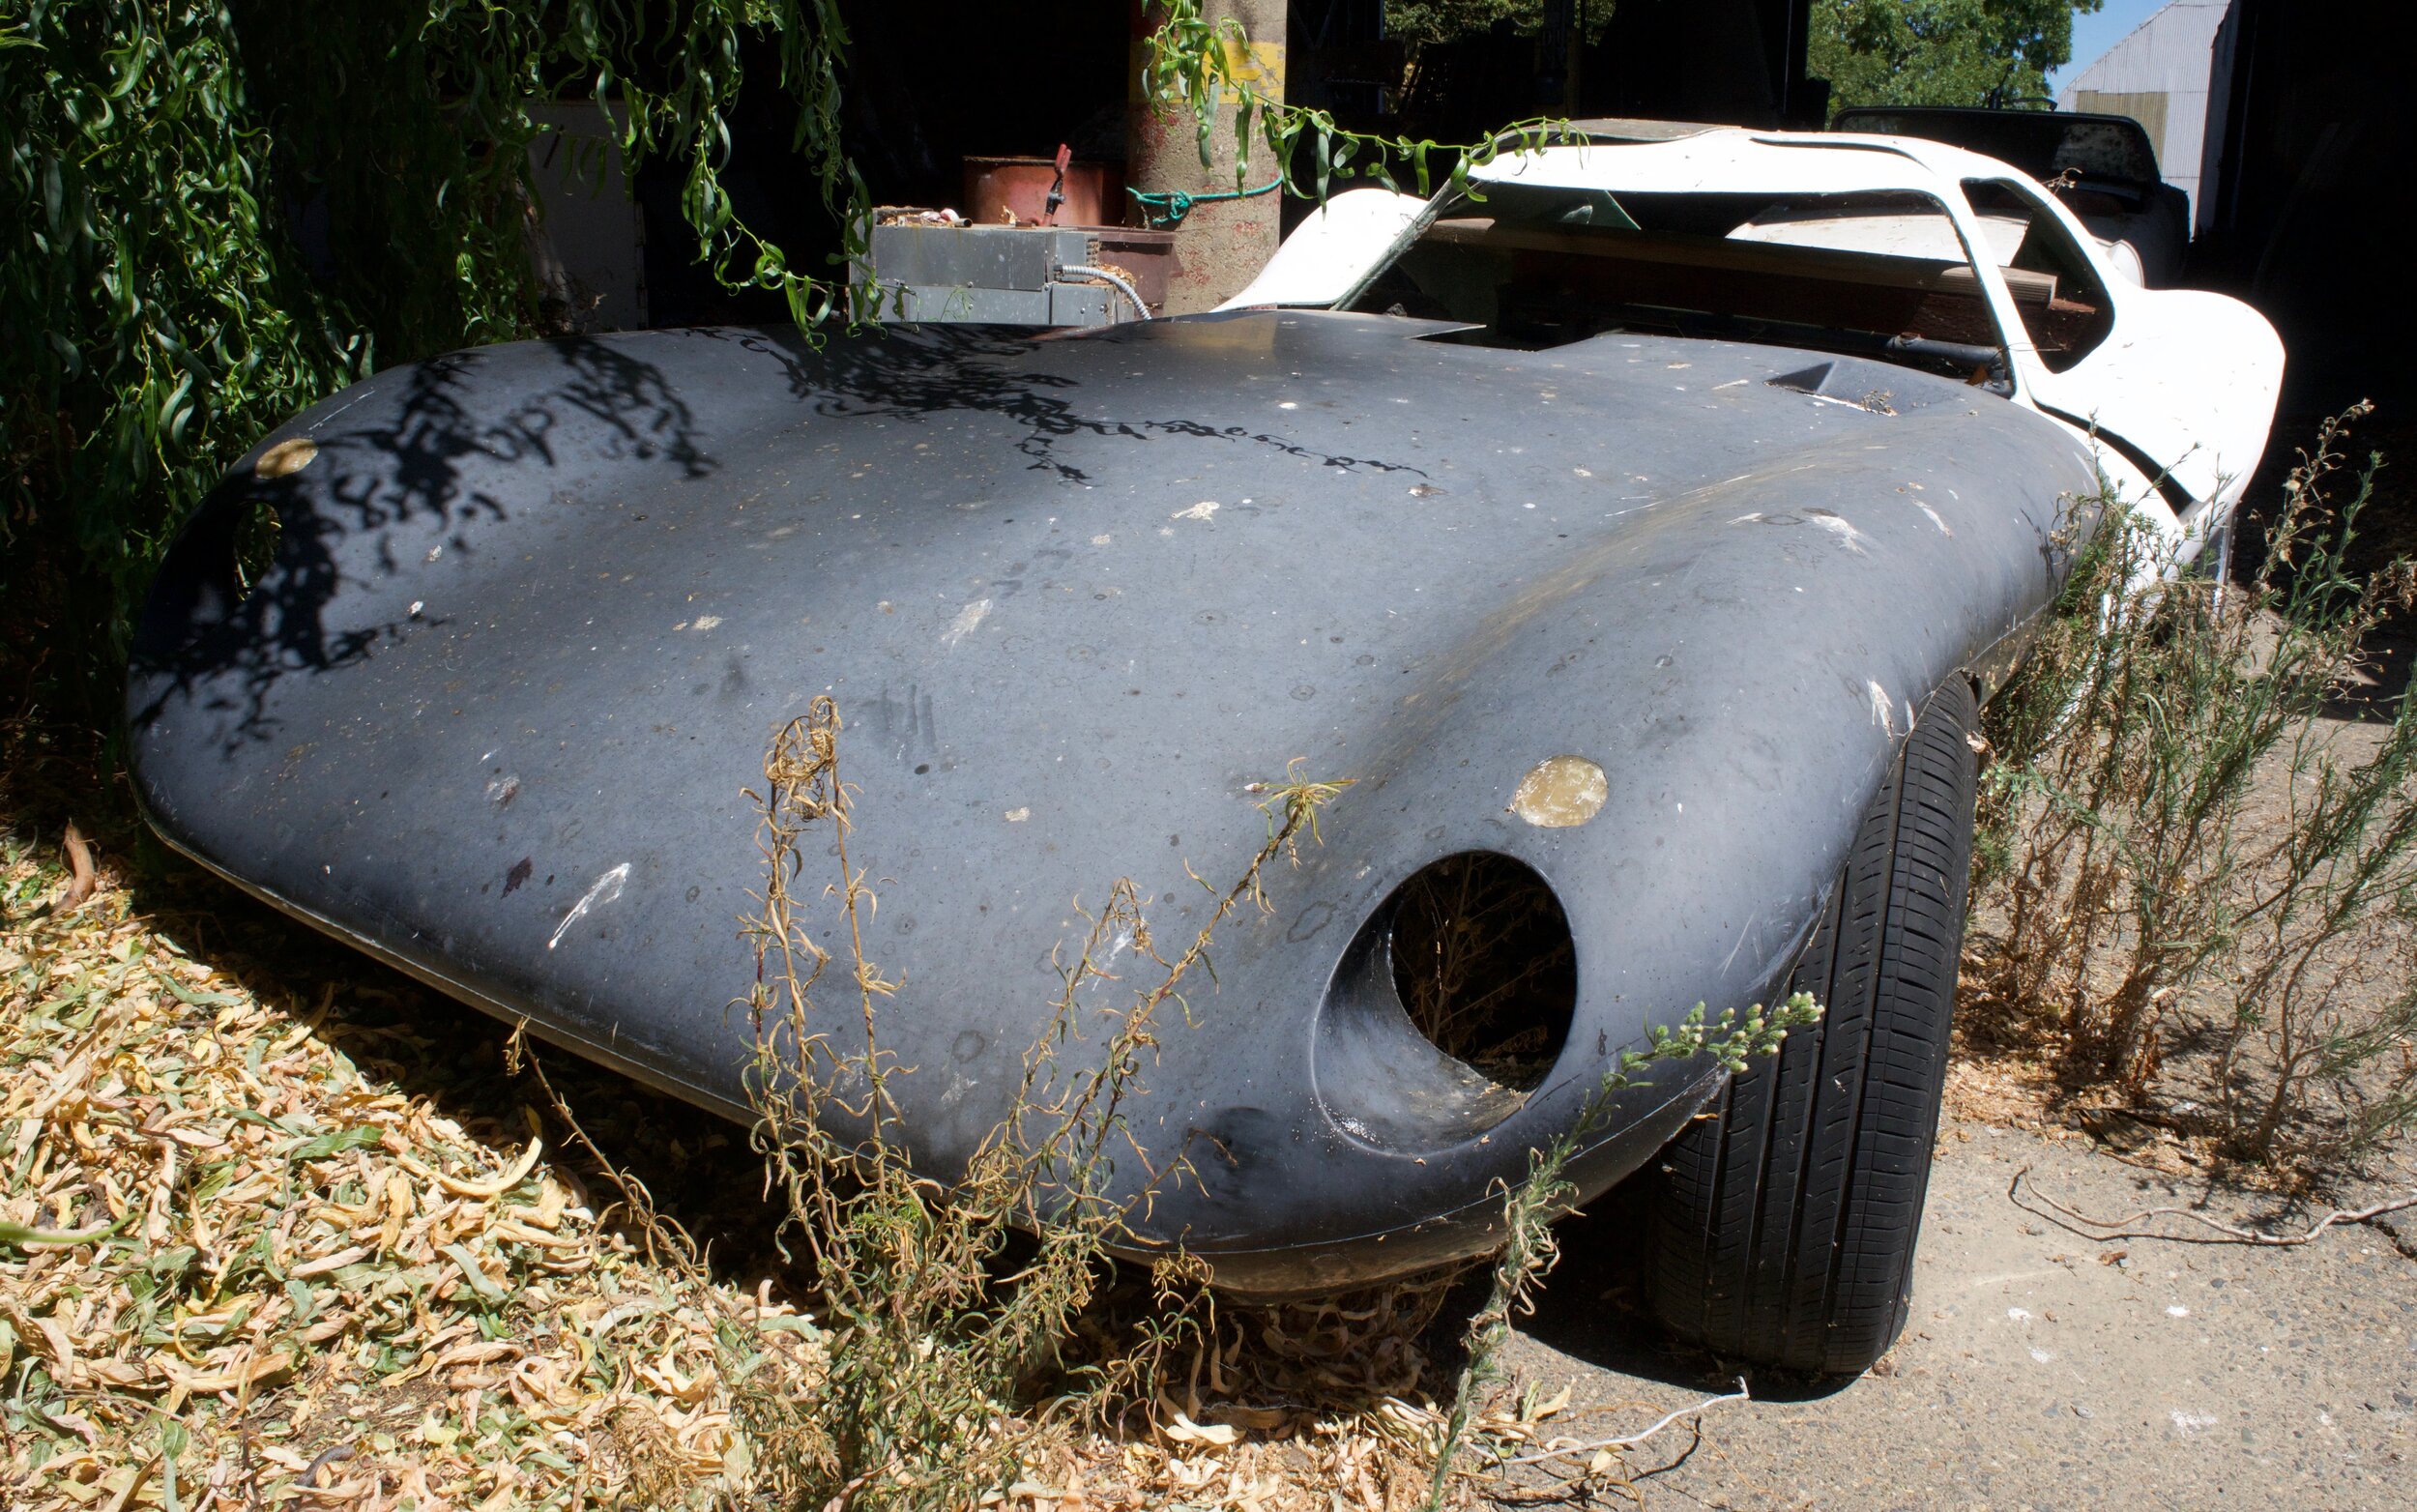  The bones of a Cheetah sports car lurk outside under a willow tree. 